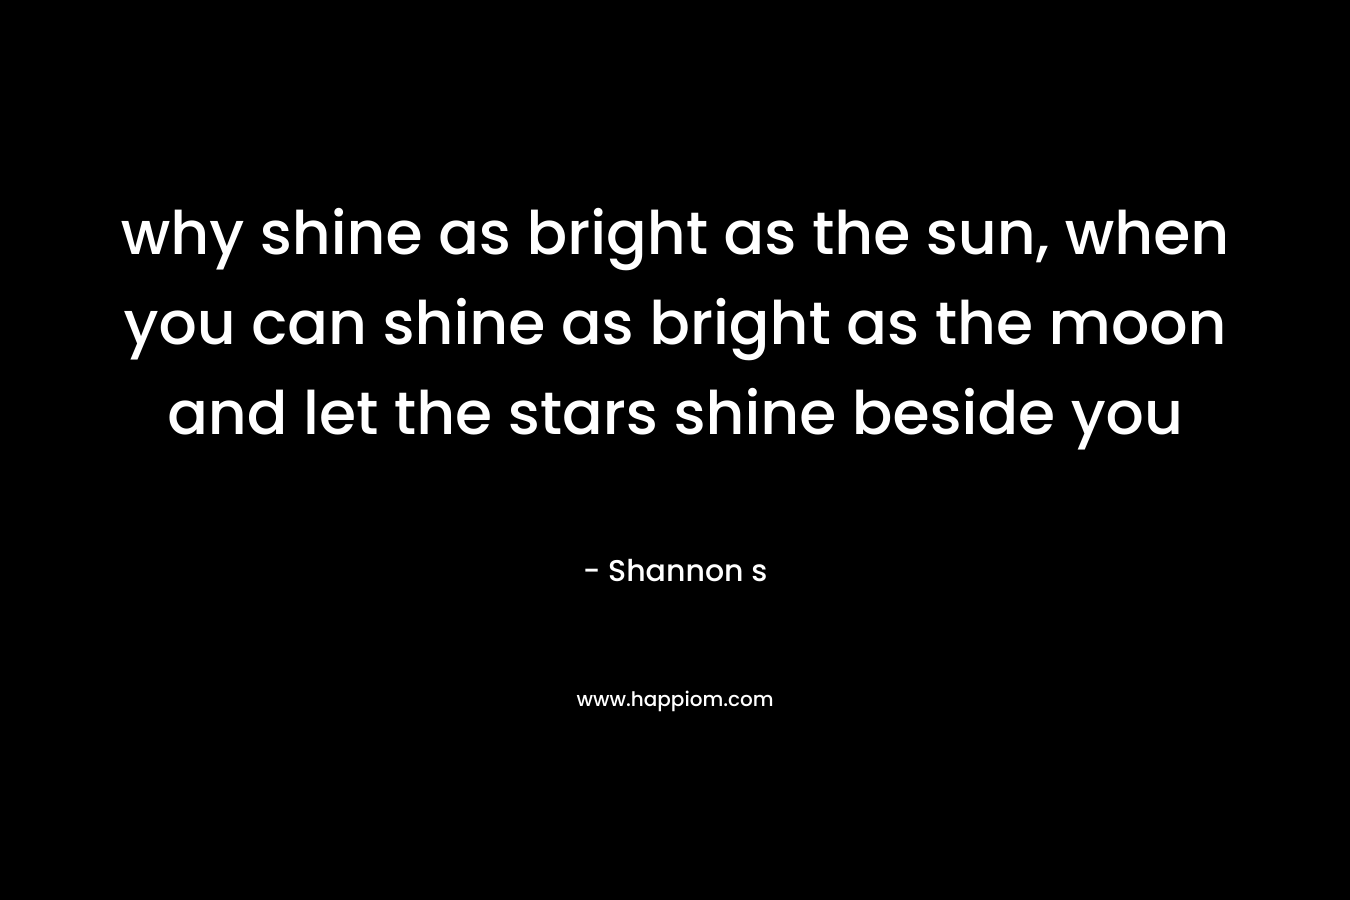 why shine as bright as the sun, when you can shine as bright as the moon and let the stars shine beside you